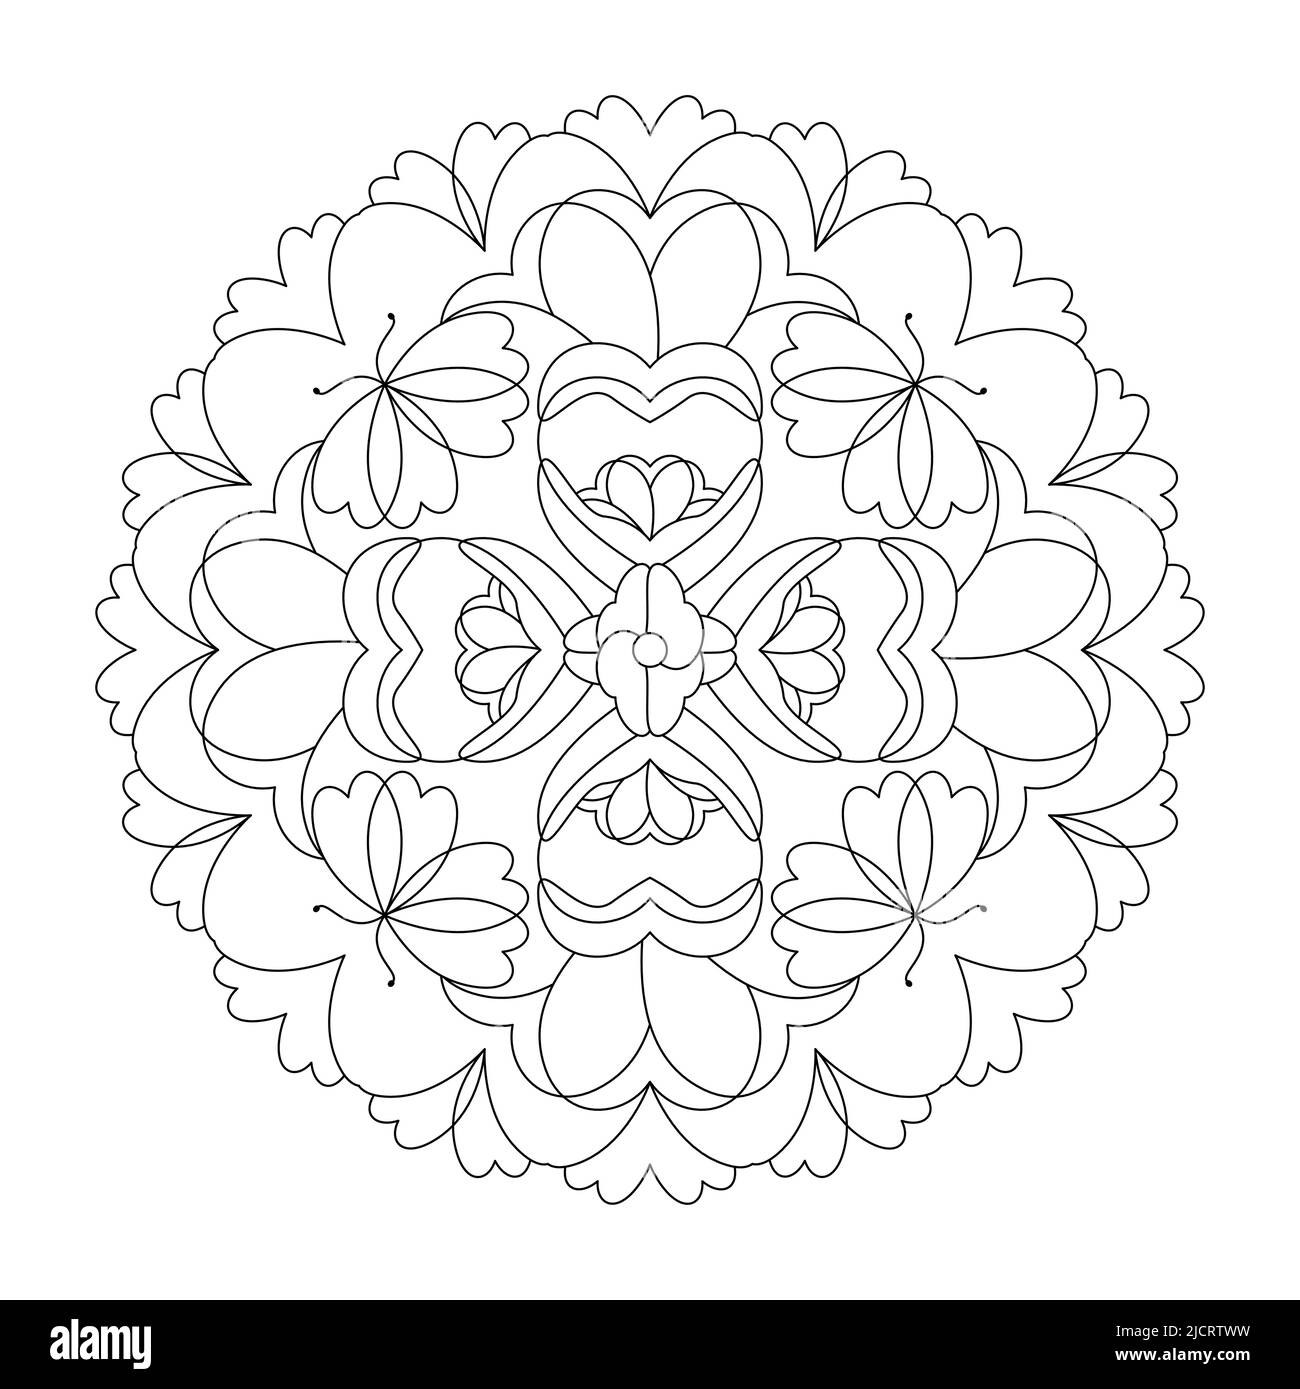 Mandala with hearts and butterflies. Anti-stress coloring page. Art Therapy. Vector illustration black and white. Stock Vector